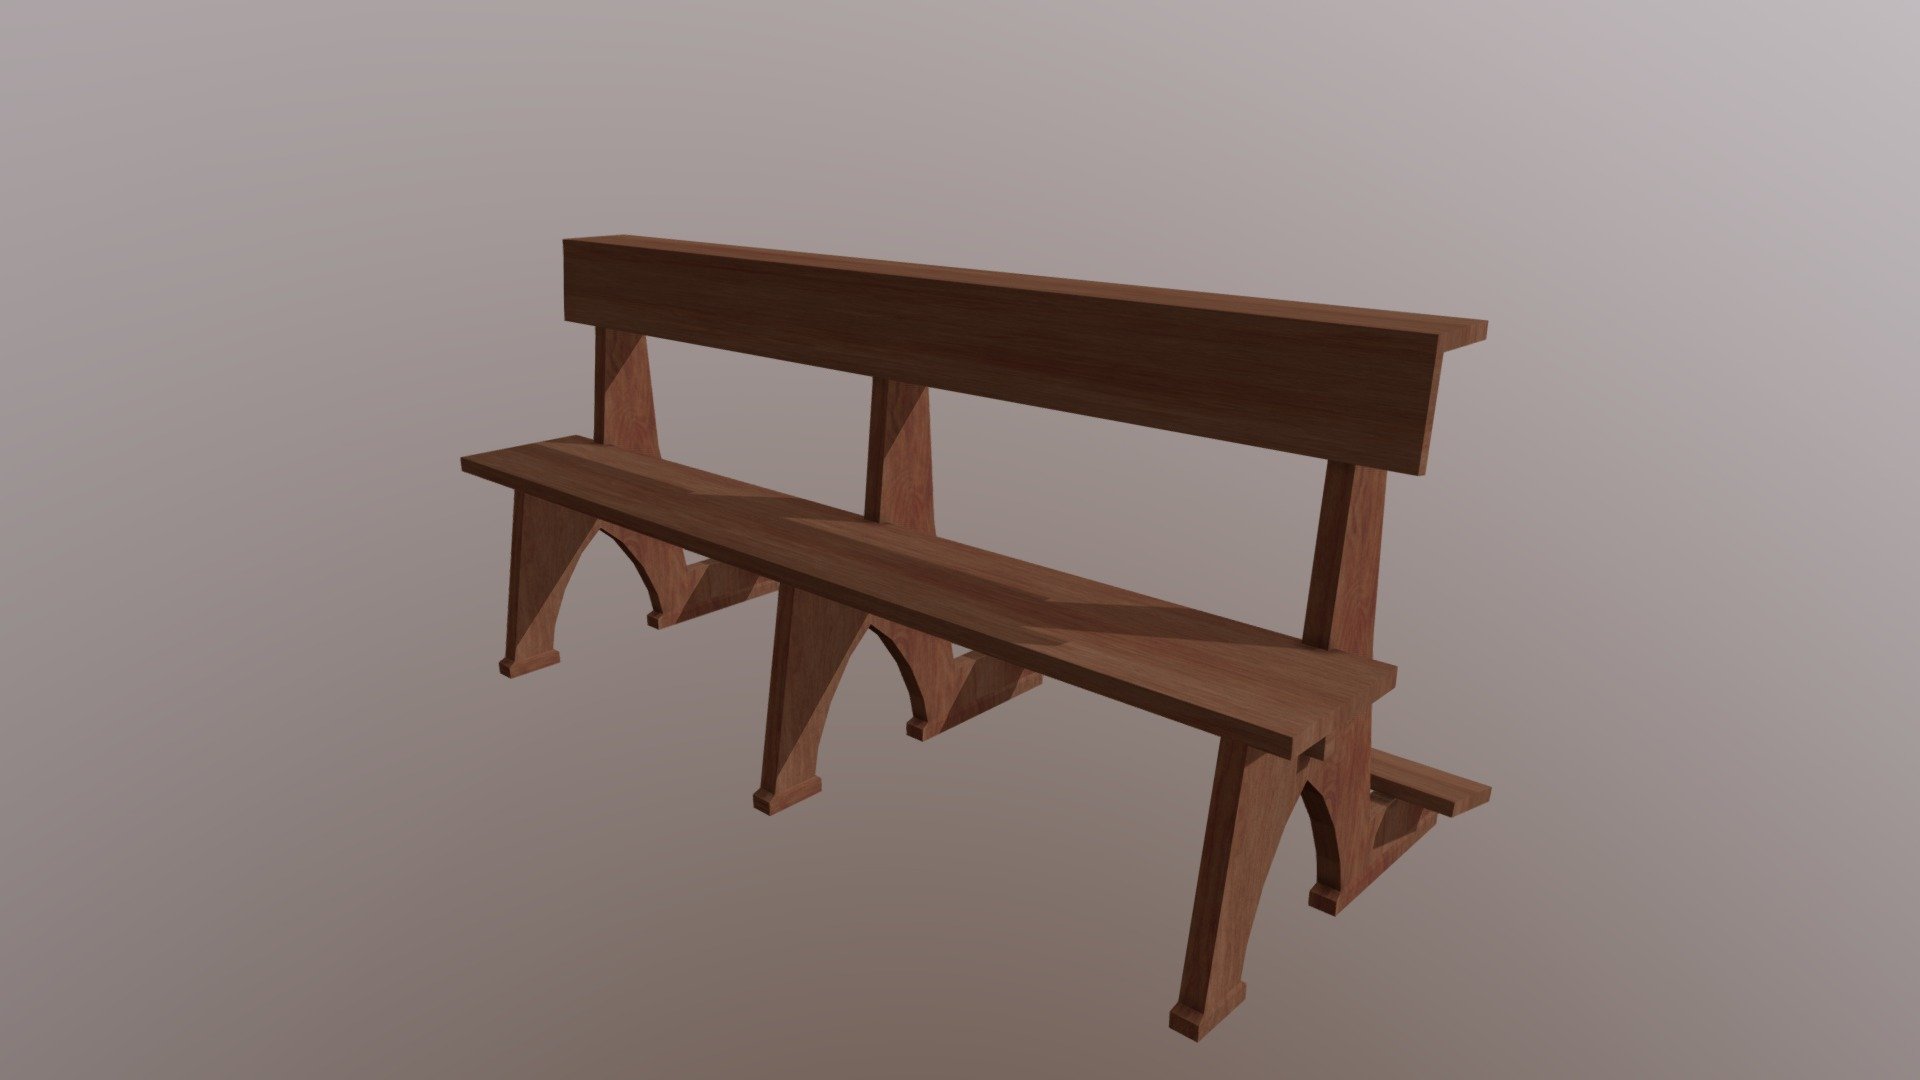 It is simple low poly bench, based on benches in Milano cathedral
Orginal textures: https://www.poliigon.com/texture/wood-fine-dark-004 - Church Bench - Download Free 3D model by Ryoce 3d model